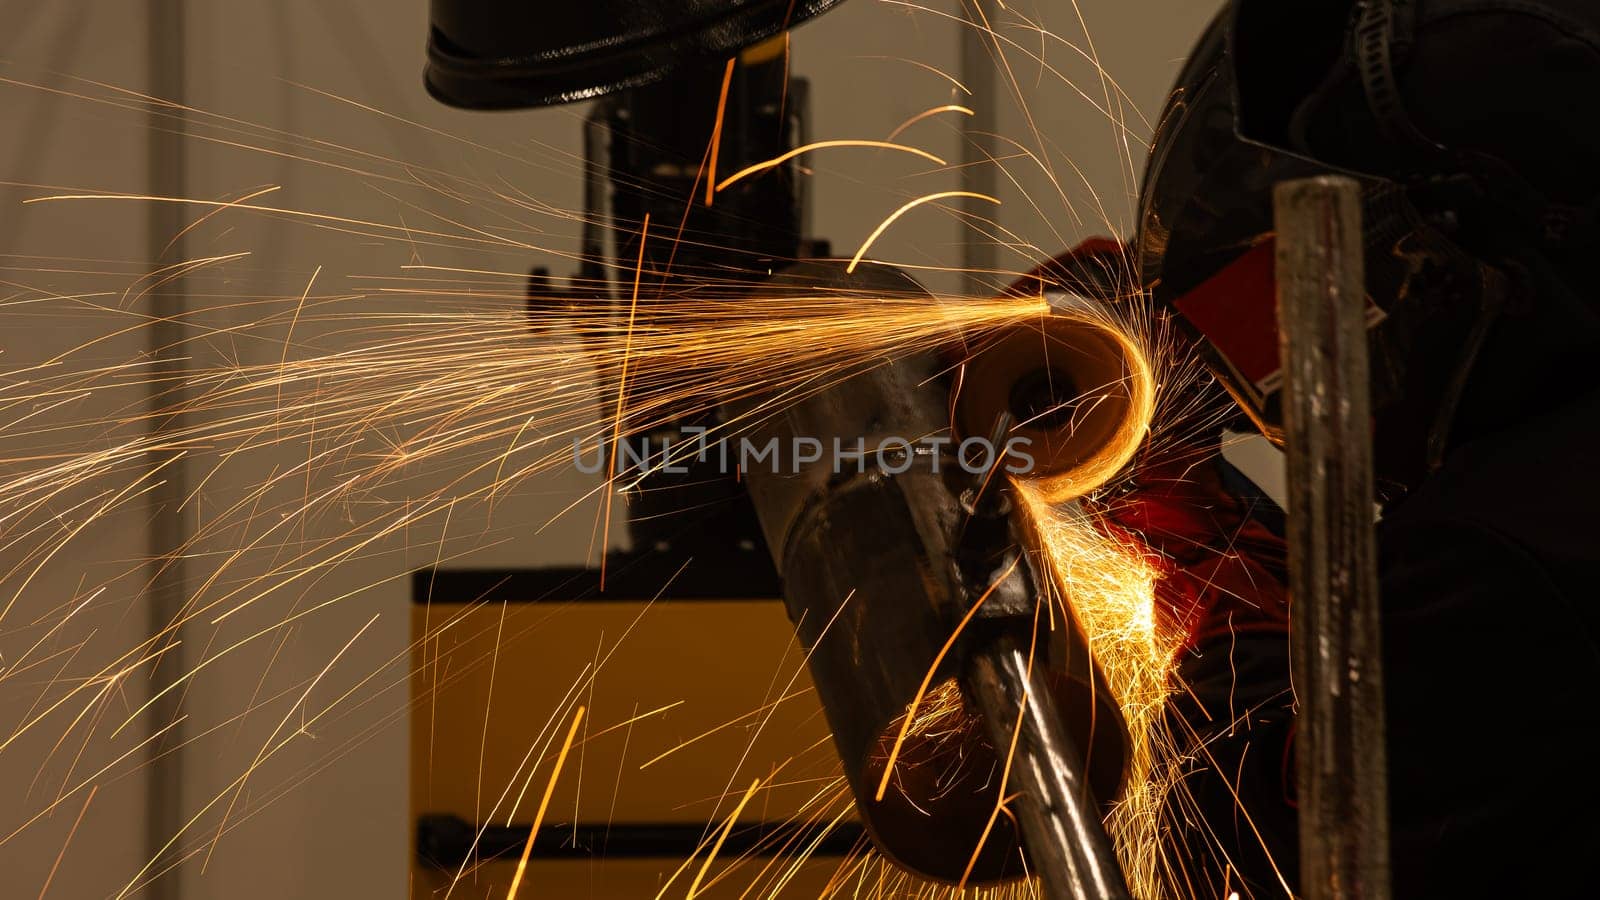 A welder wearing a protective mask cuts a metal pipe